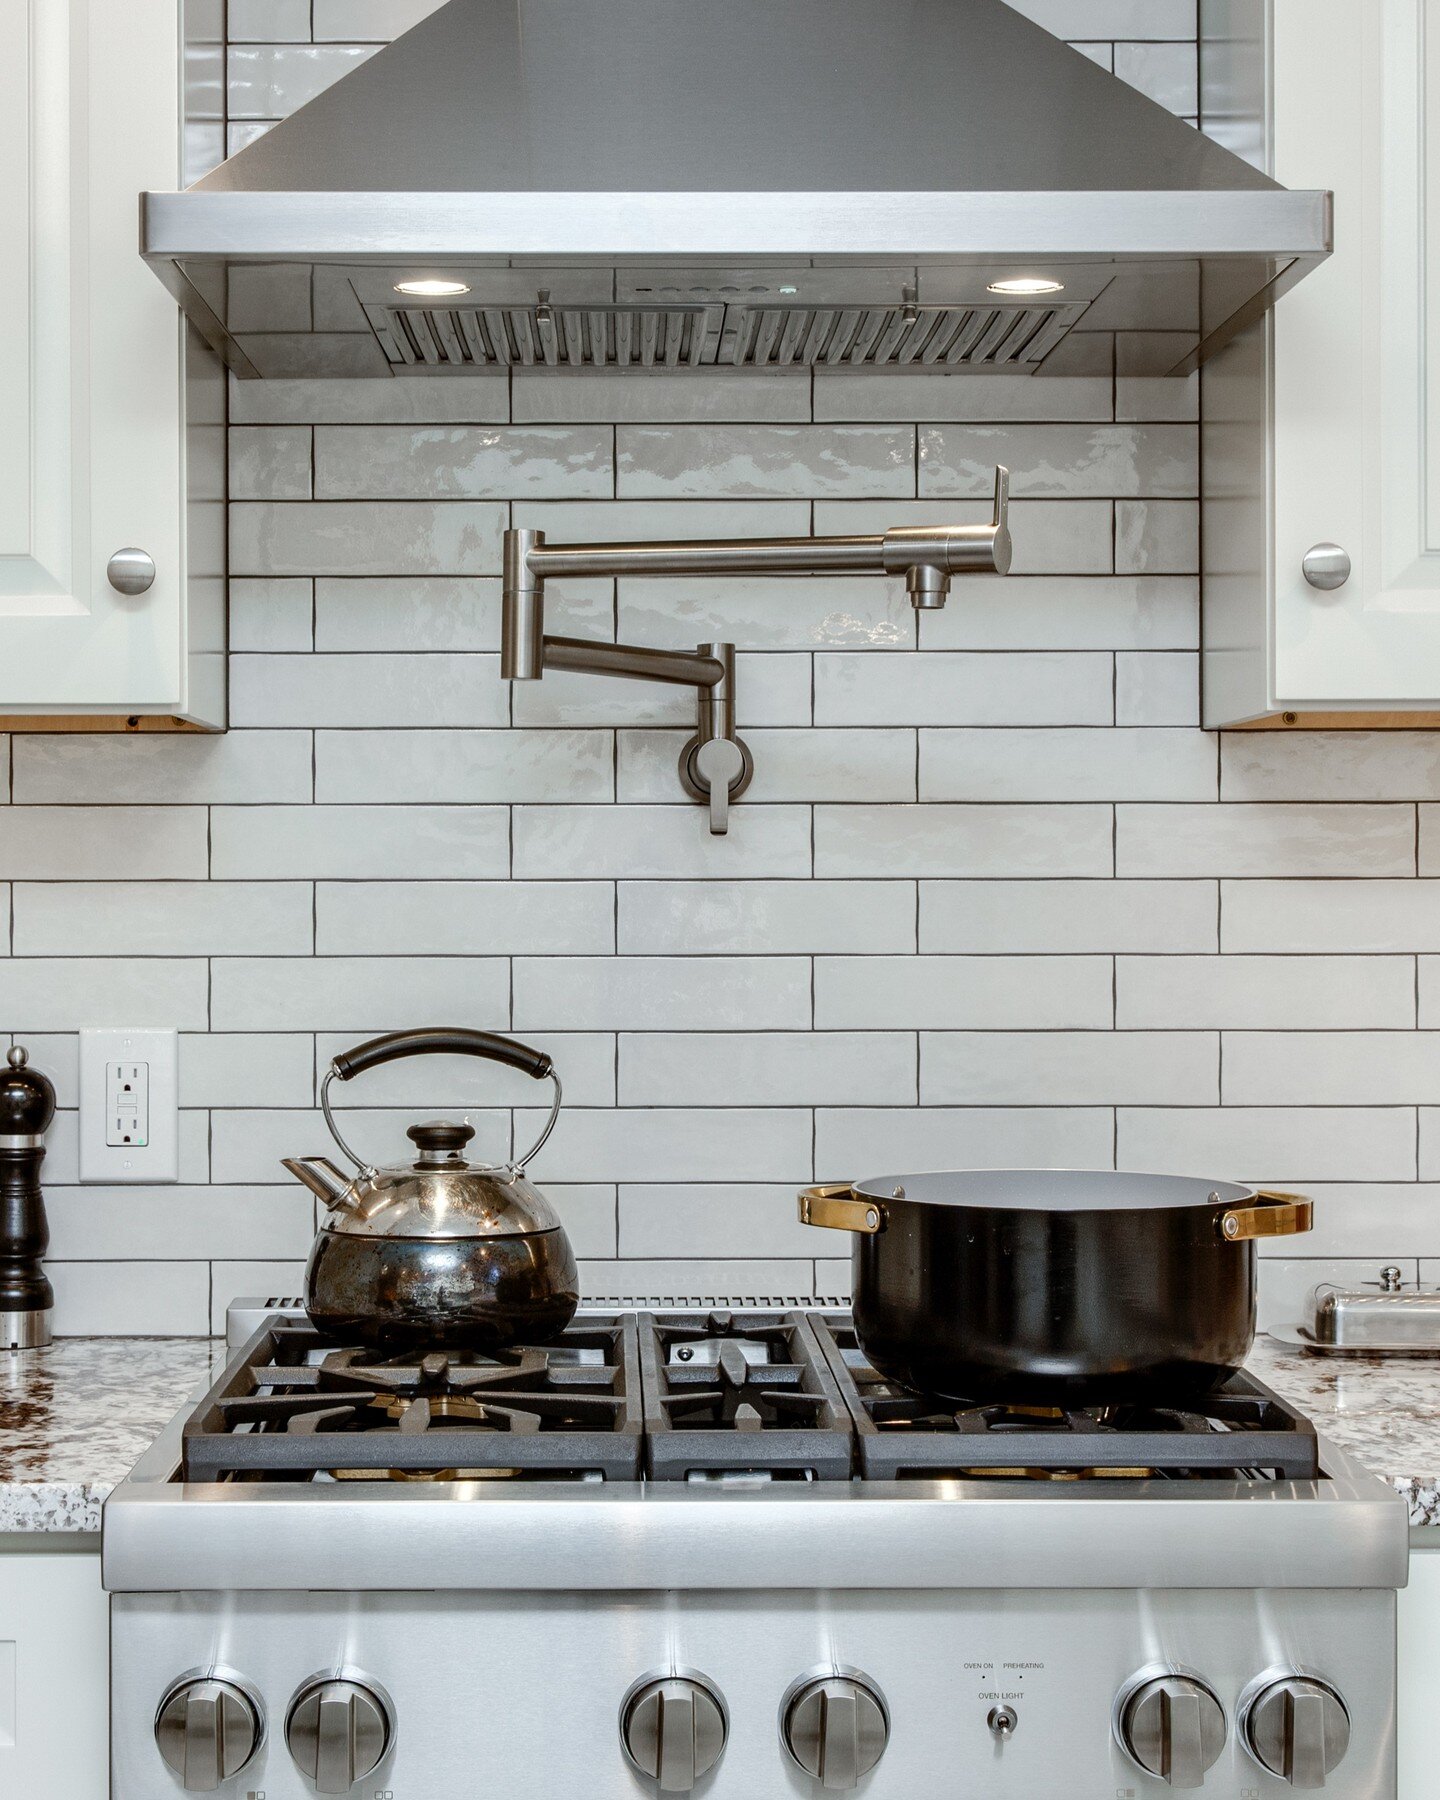 Our client was thrilled with the vent hood and pot filler! He uses it every day!